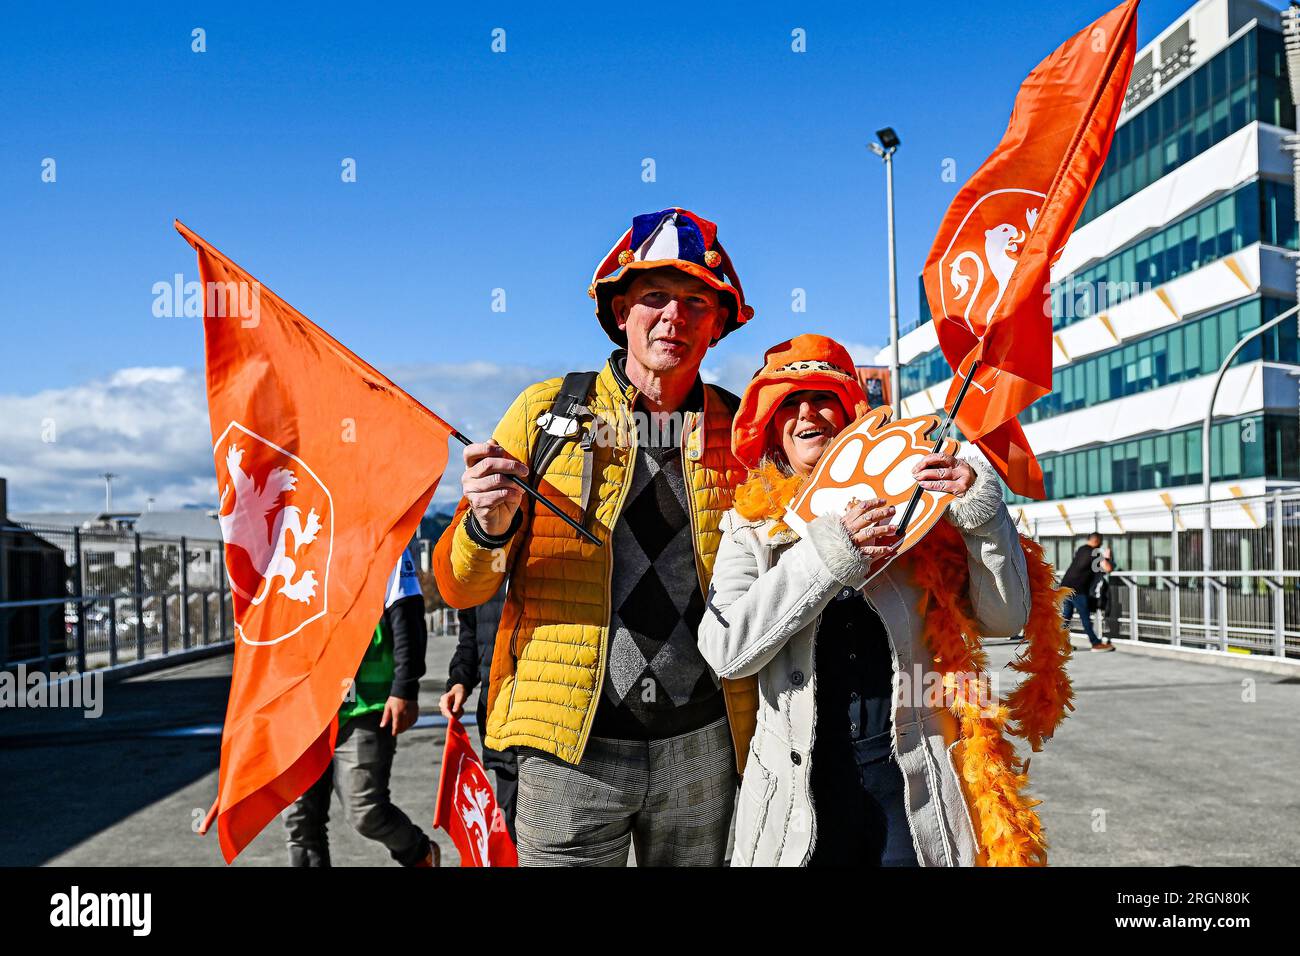 WELLINGTON - Fans of the Netherlands prior to the match between Spain and the Netherlands in the Sky Stadium at the World Cup in New Zealand and Australia. ANP/KERRY MARSHALL Stock Photo